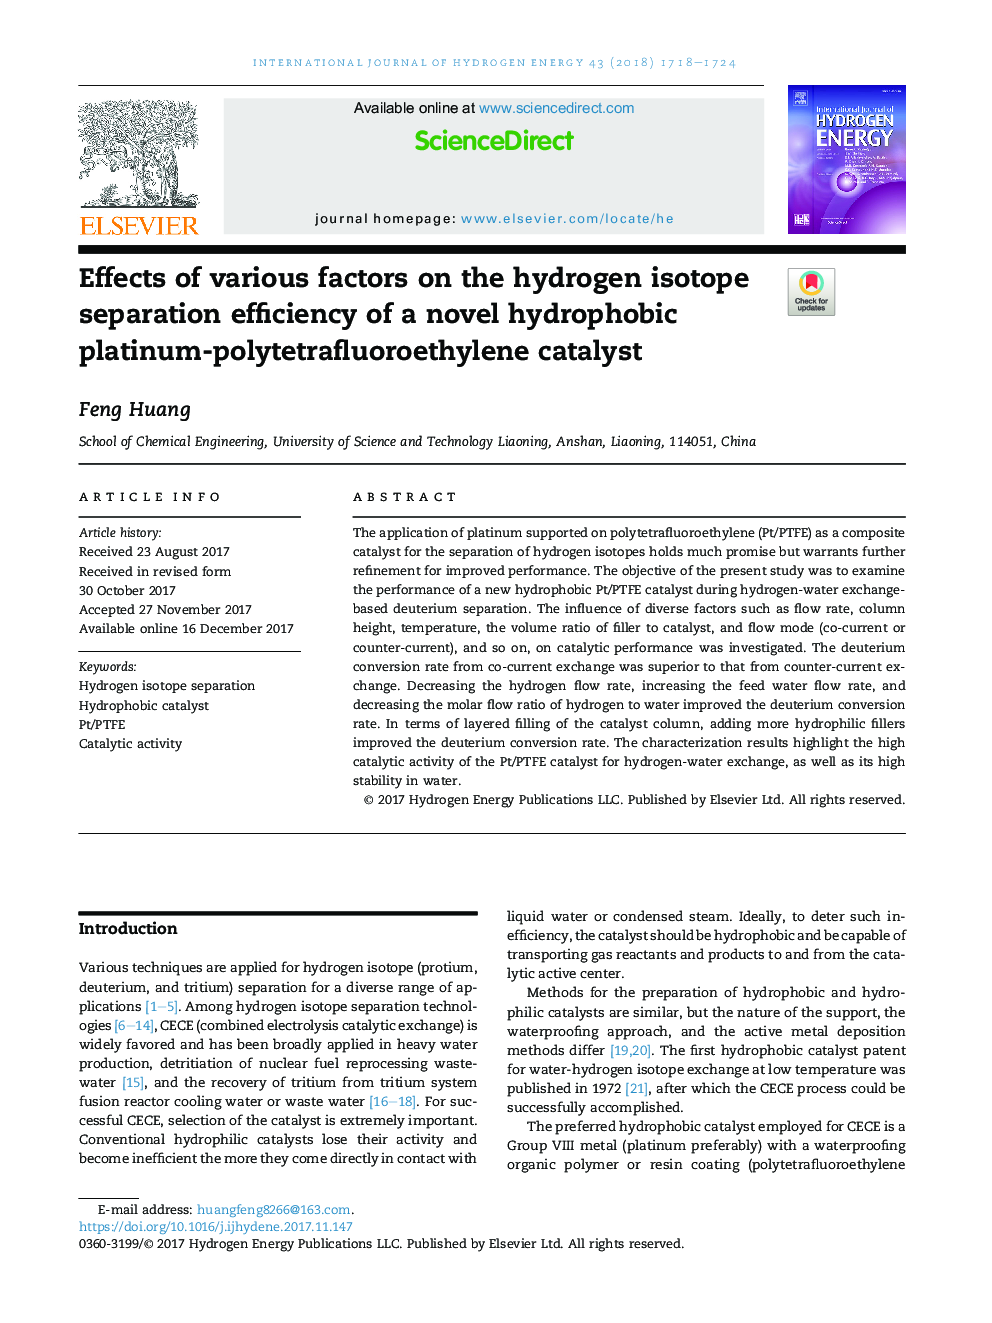 Effects of various factors on the hydrogen isotope separation efficiency of a novel hydrophobic platinum-polytetrafluoroethylene catalyst